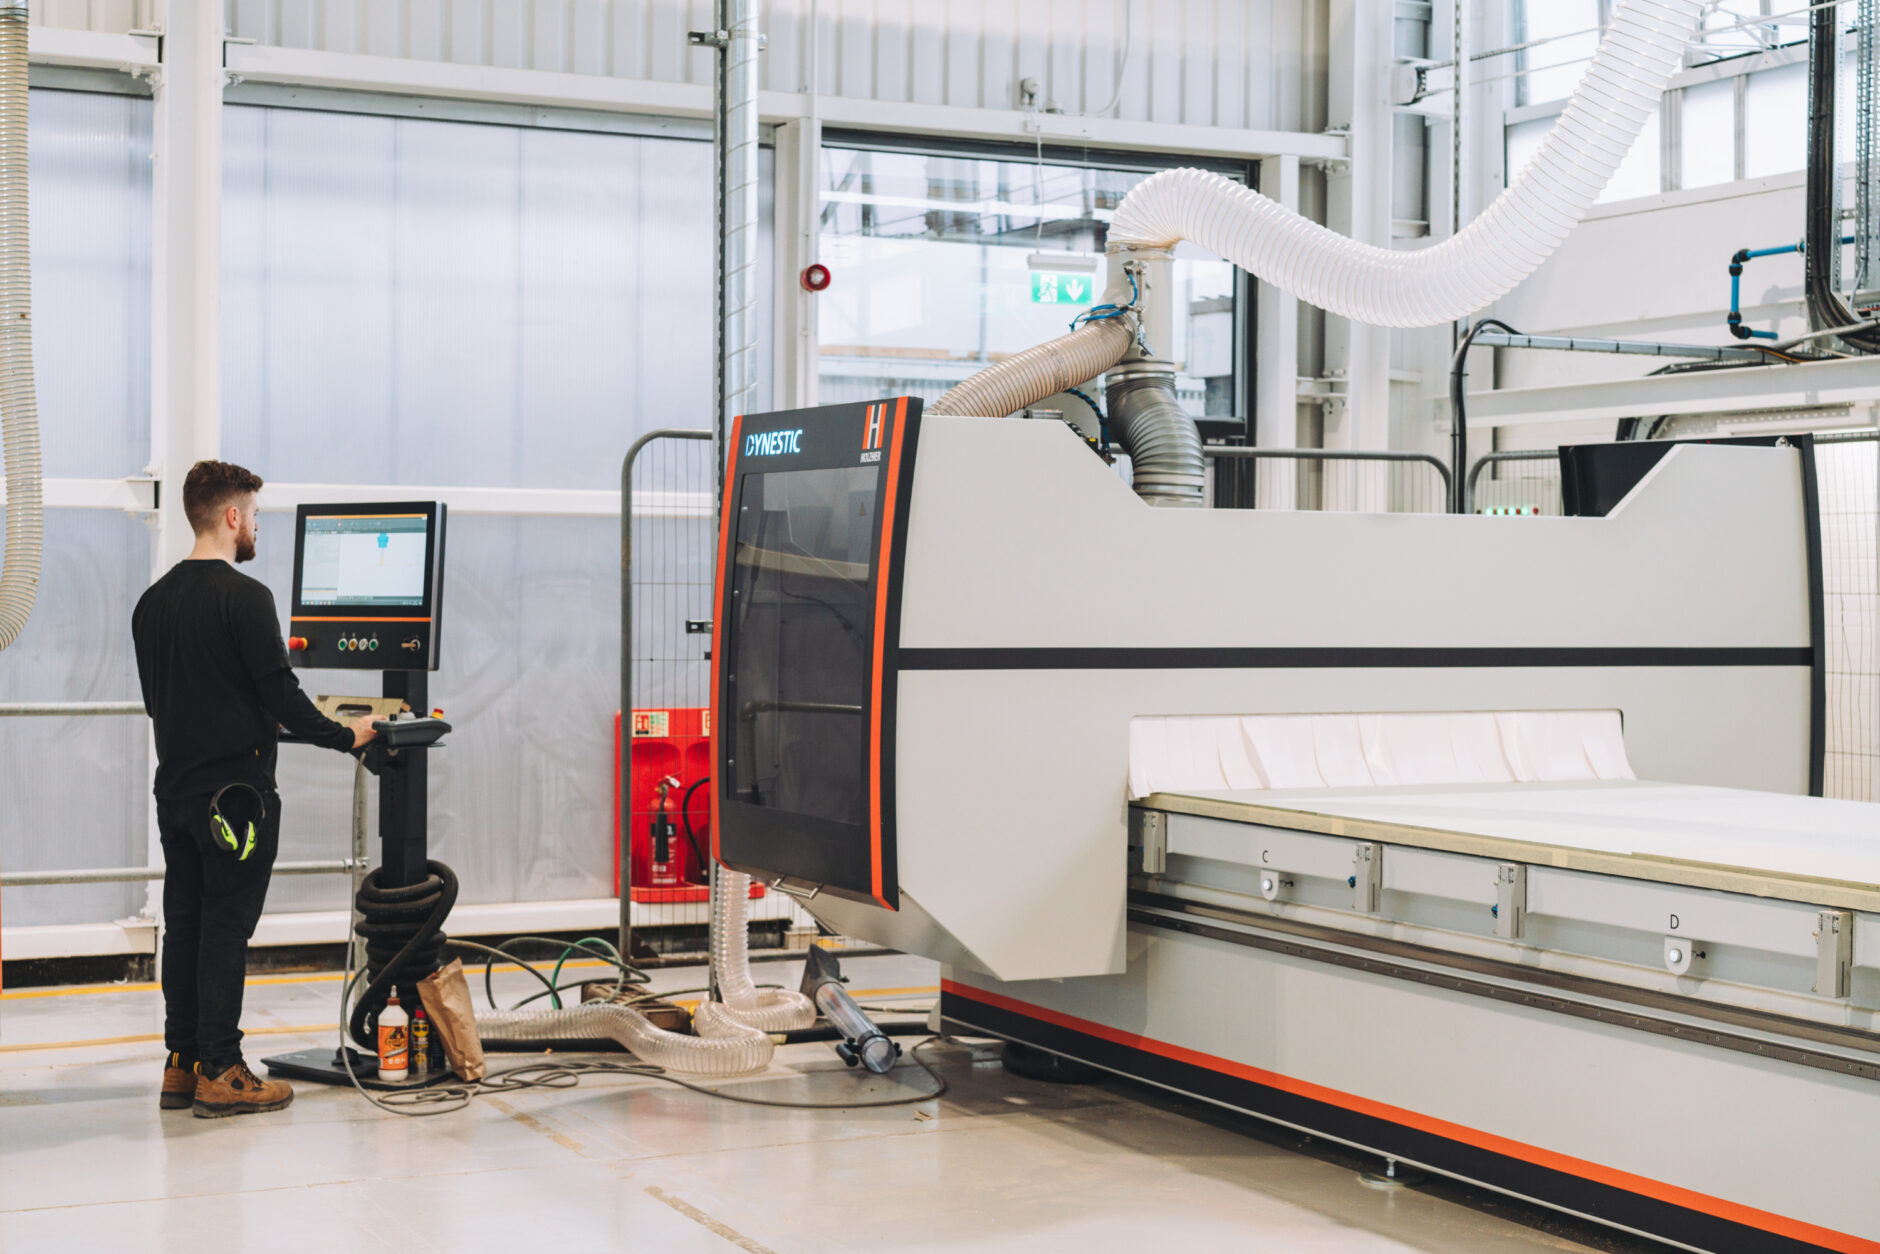 A maker member uses the new Dynestic 7505 flatbed CNC router in the CNC suite at Bloqs' new open access factory. Photo: Claudia Agati. 